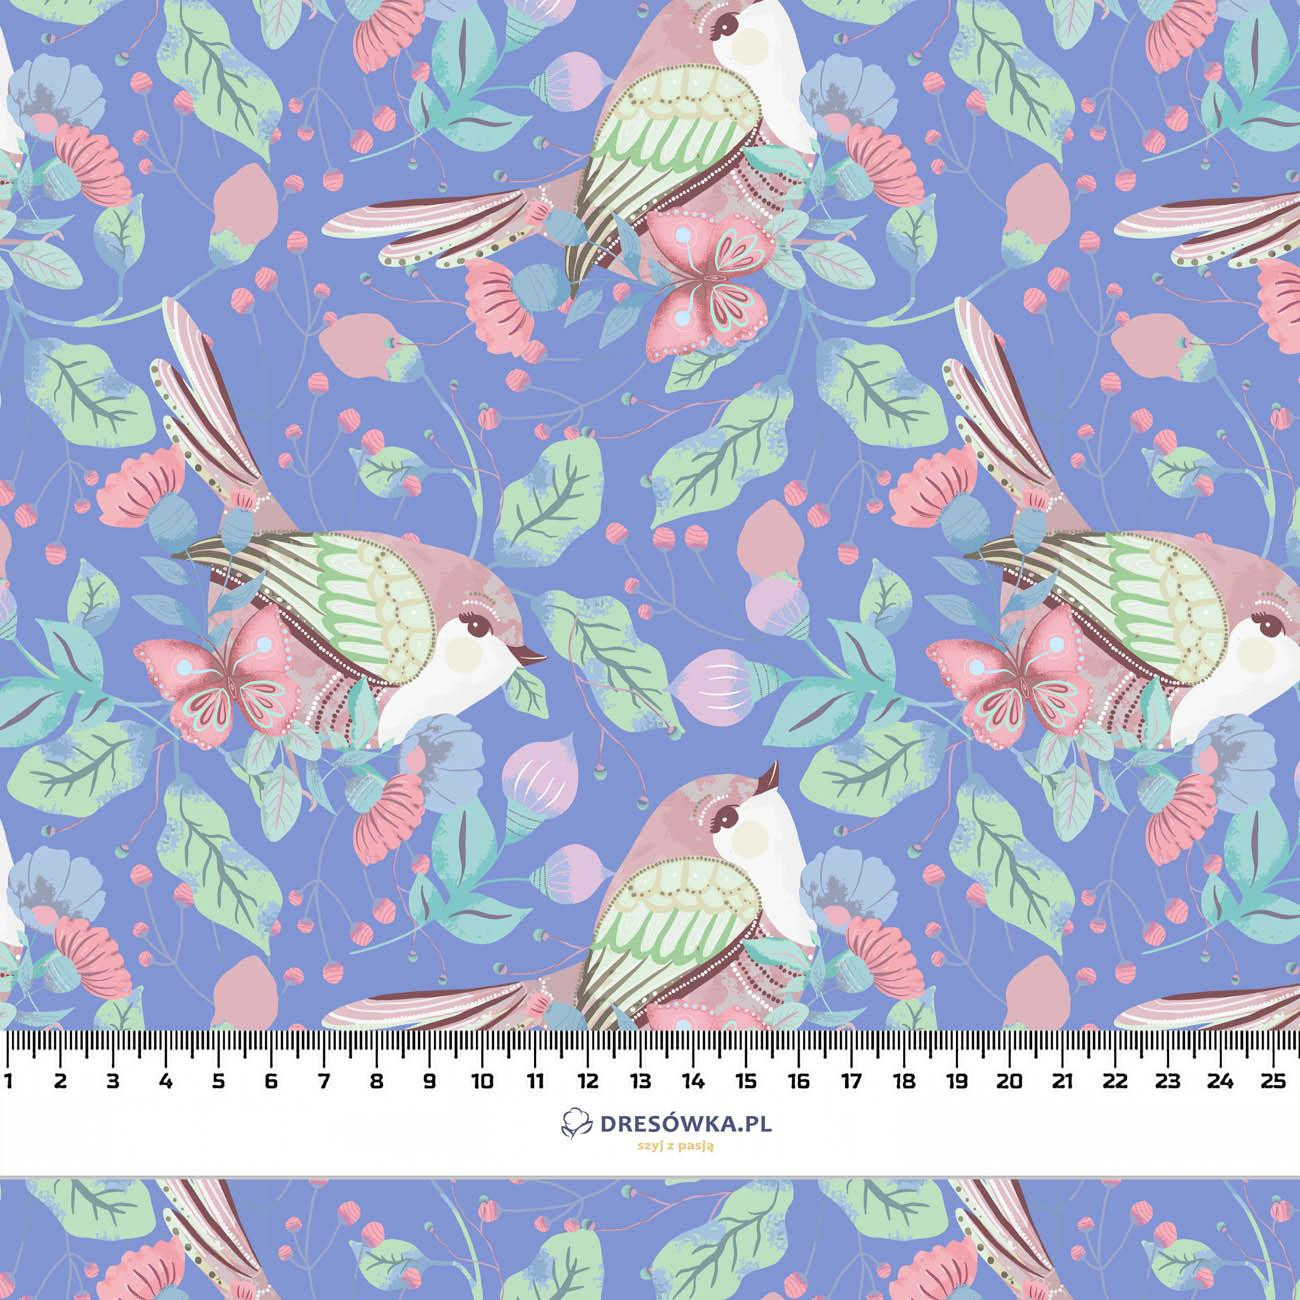 SPRING MELODY pat. 4 - Waterproof woven fabric